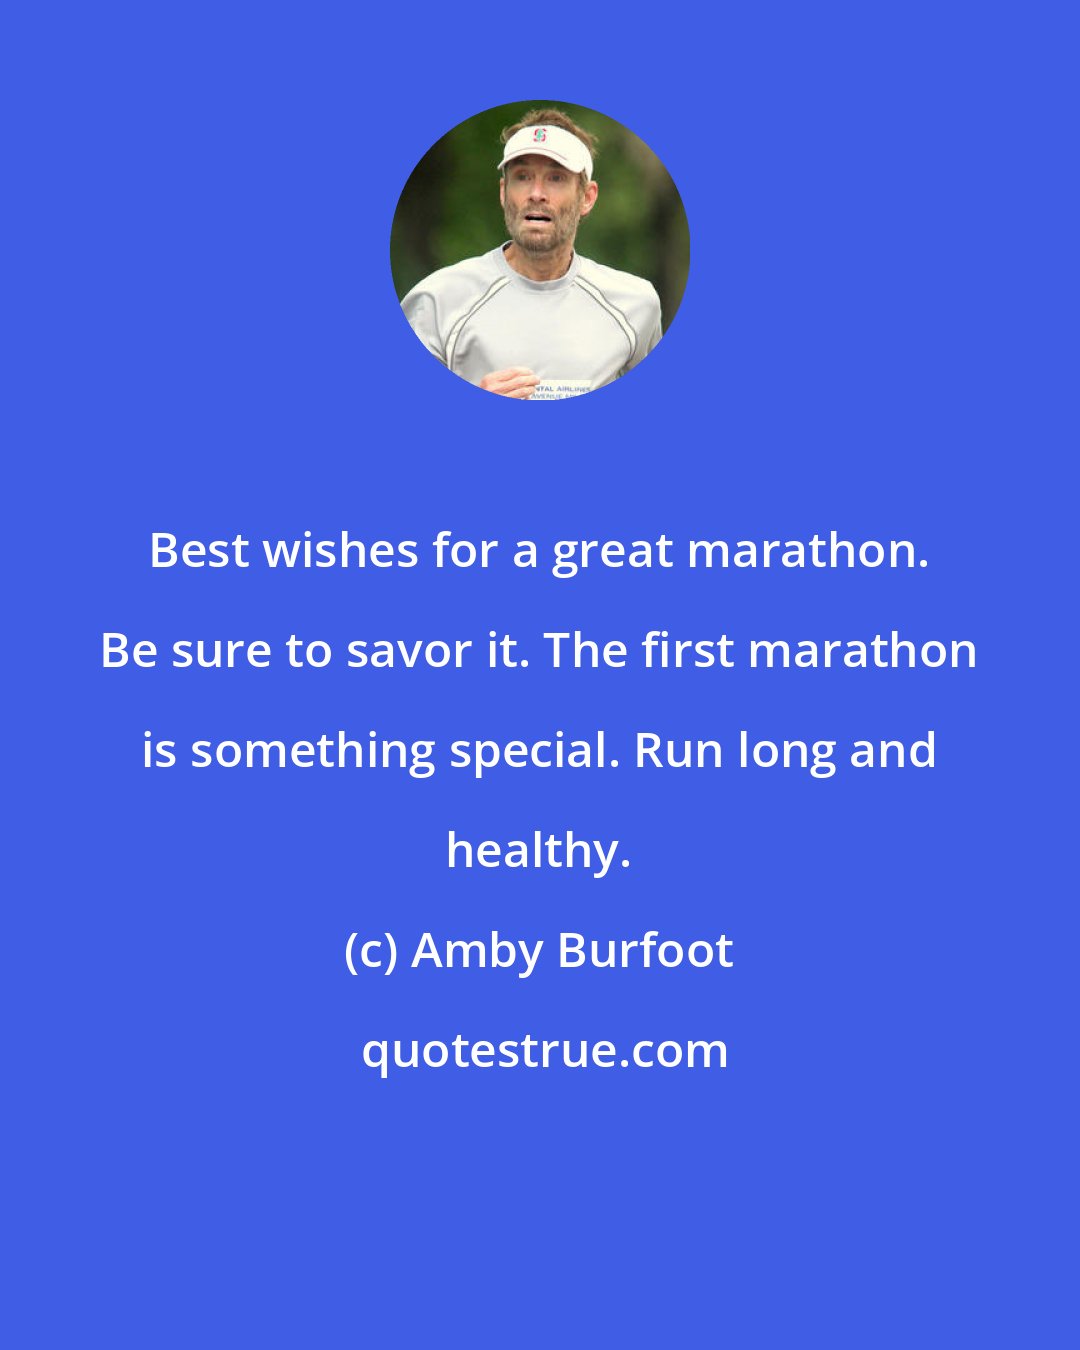 Amby Burfoot: Best wishes for a great marathon. Be sure to savor it. The first marathon is something special. Run long and healthy.